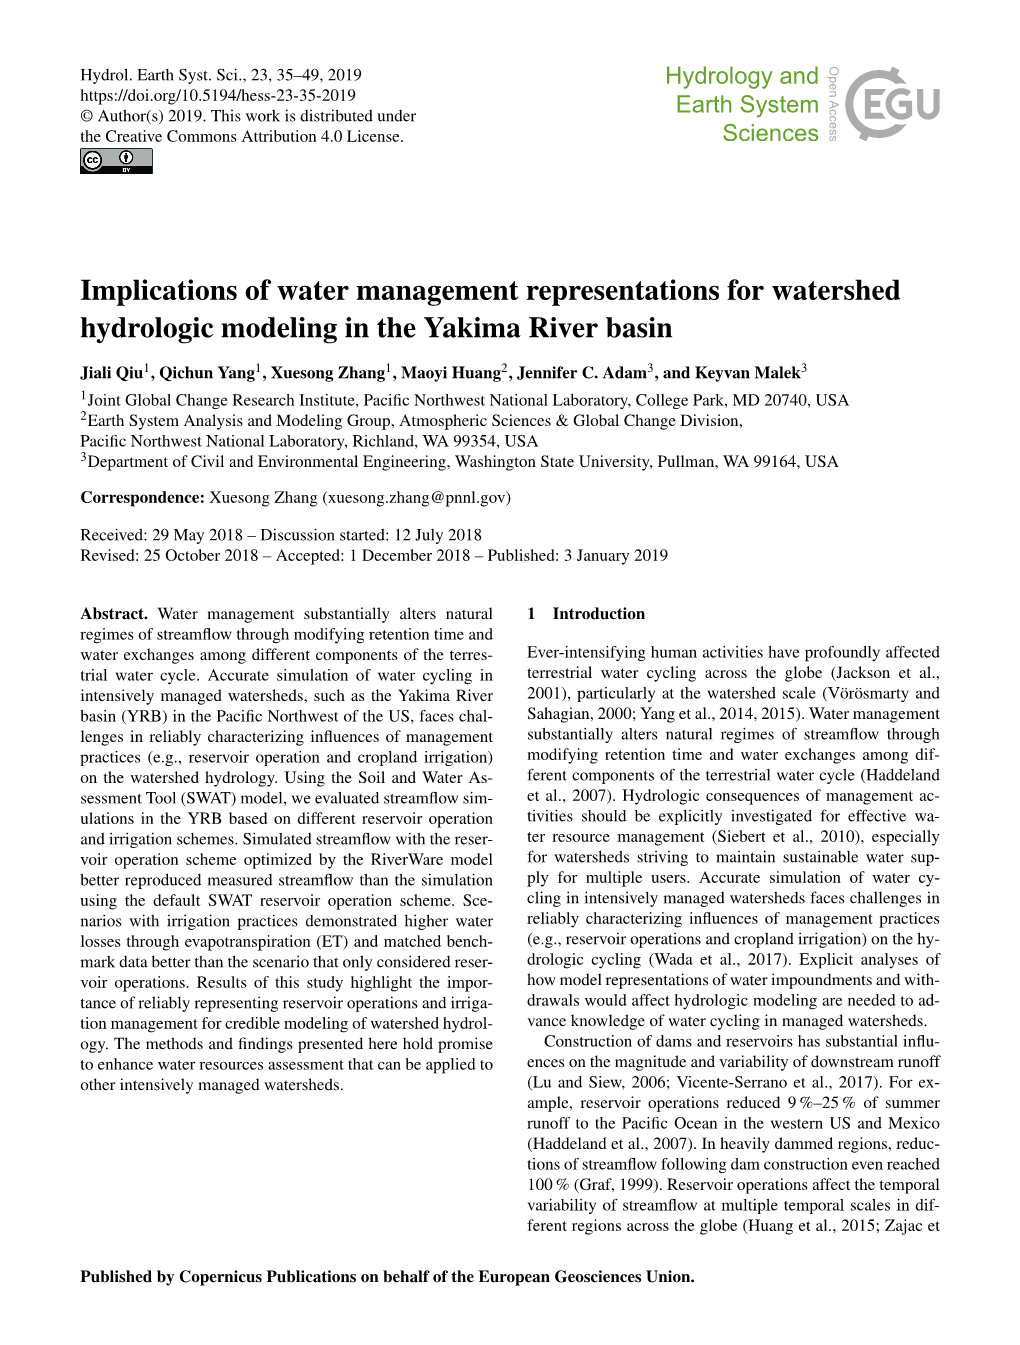 Implications of Water Management Representations for Watershed Hydrologic Modeling in the Yakima River Basin